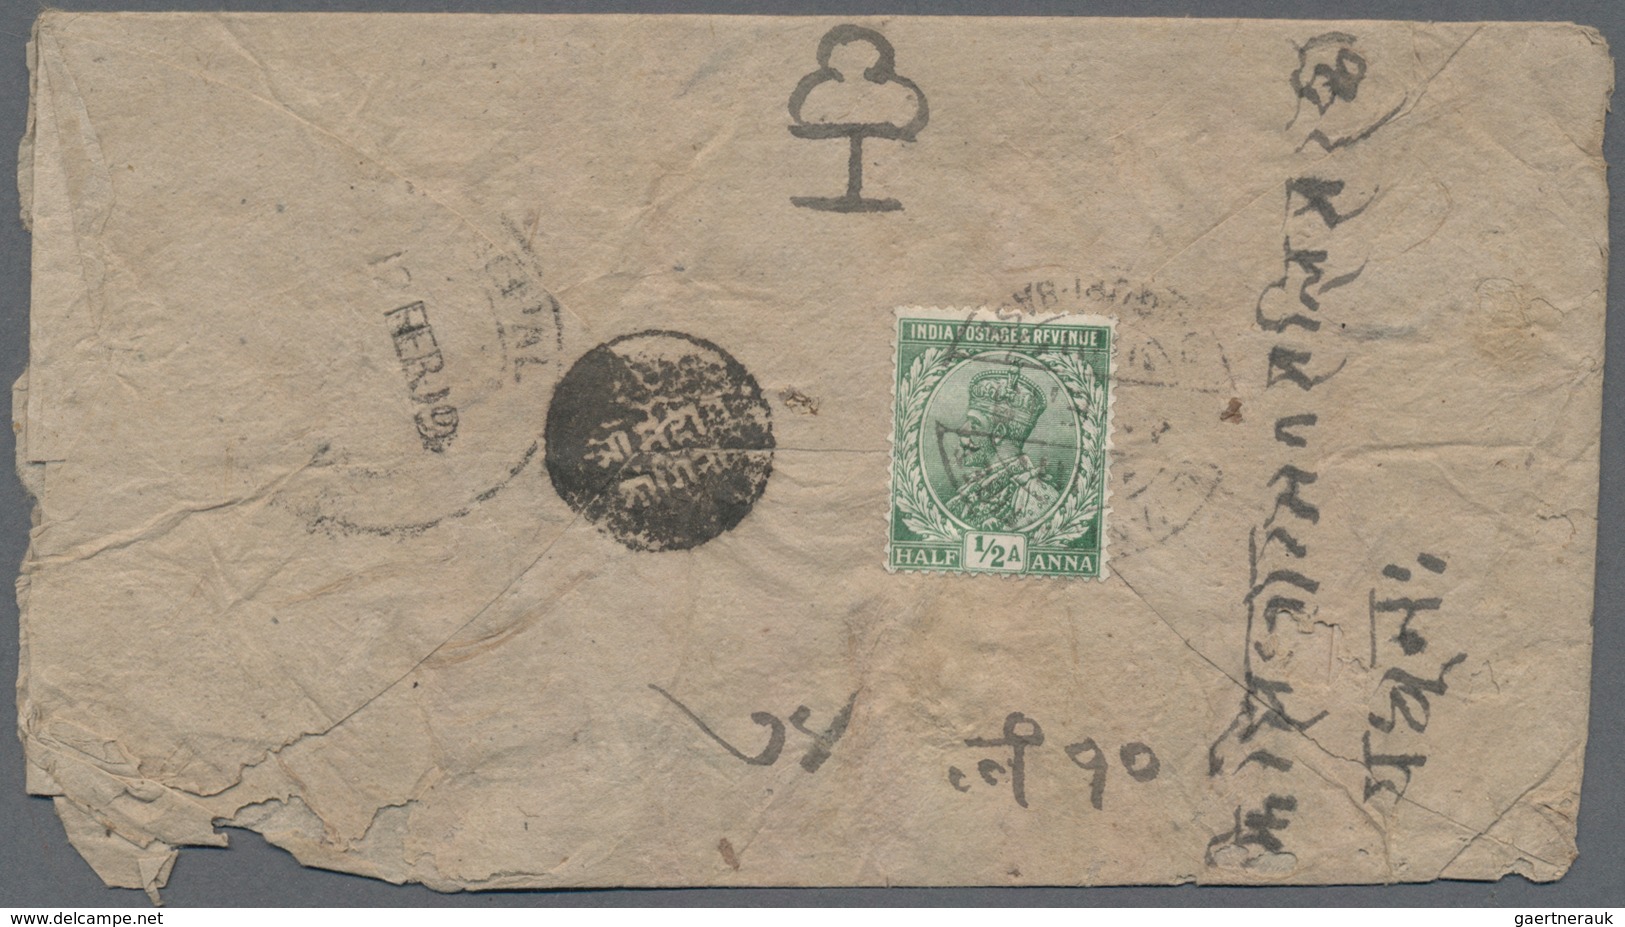 Tibet: 1919/36, India P.o. In Tibet, Covers (5) All To Nepal With "Siliguri Base Office 4 FE 19", Ot - Andere-Azië